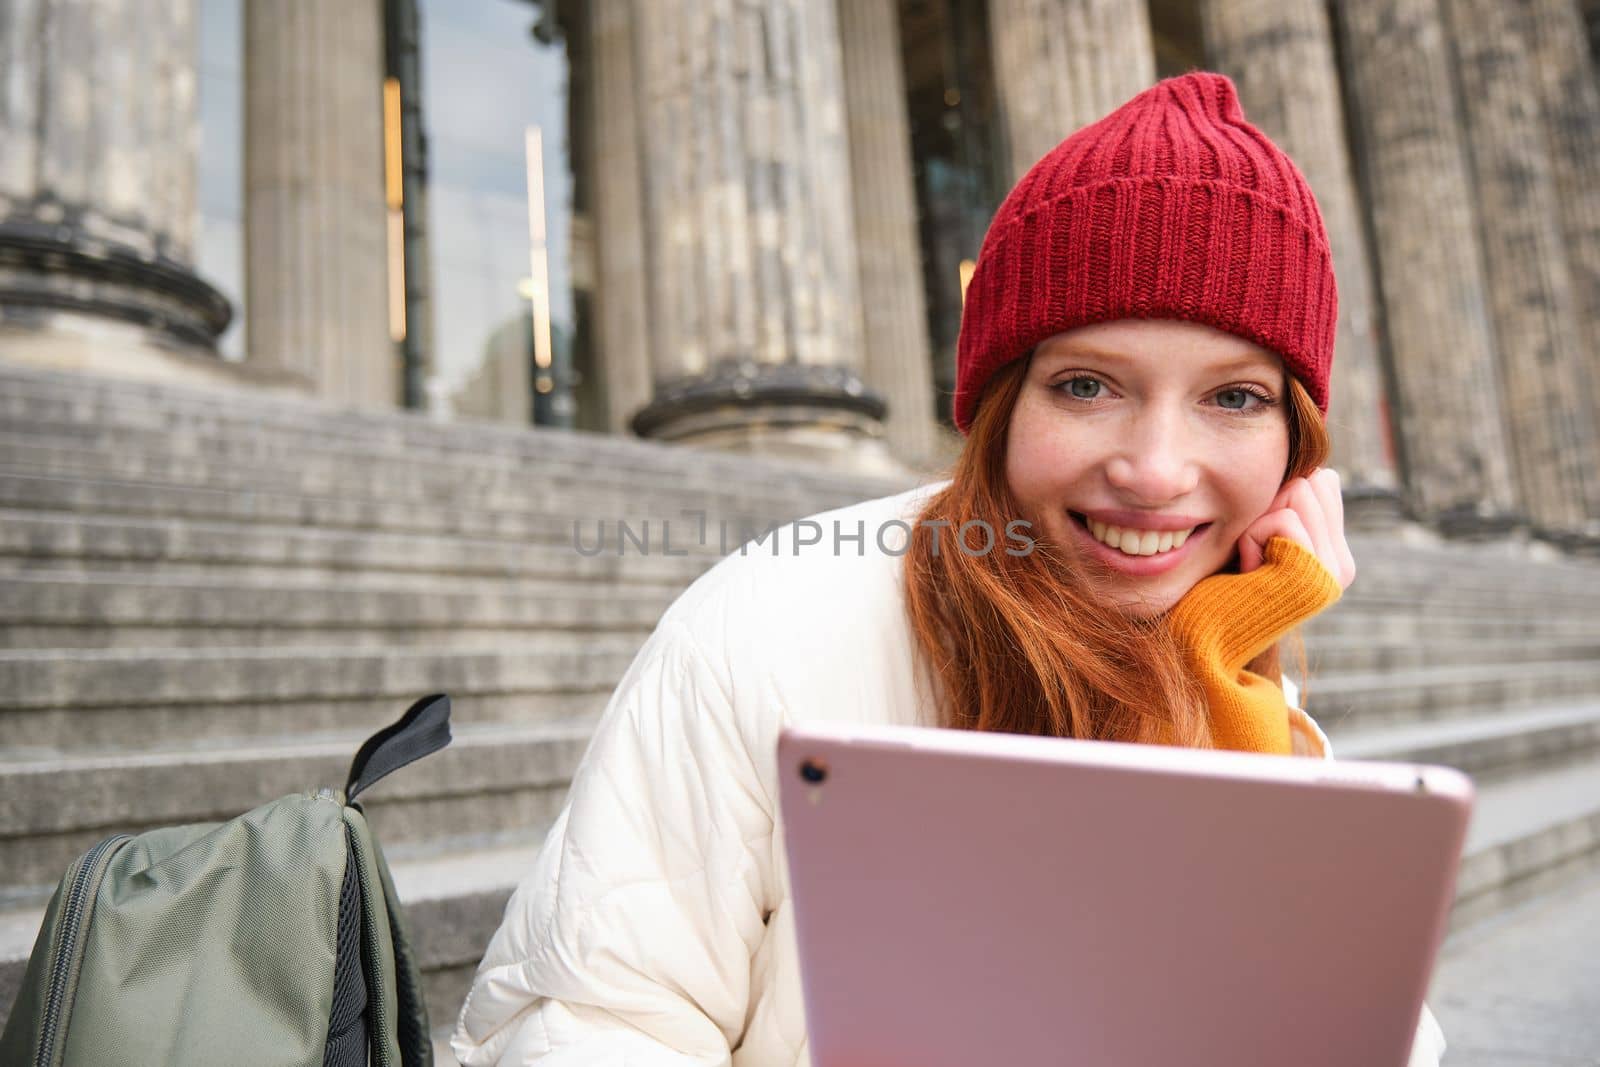 Close up portrait of cute redhead european girl, sitting in red hat near municipal building on stairs, holds digital tablet, reads e-book or surfs internet.